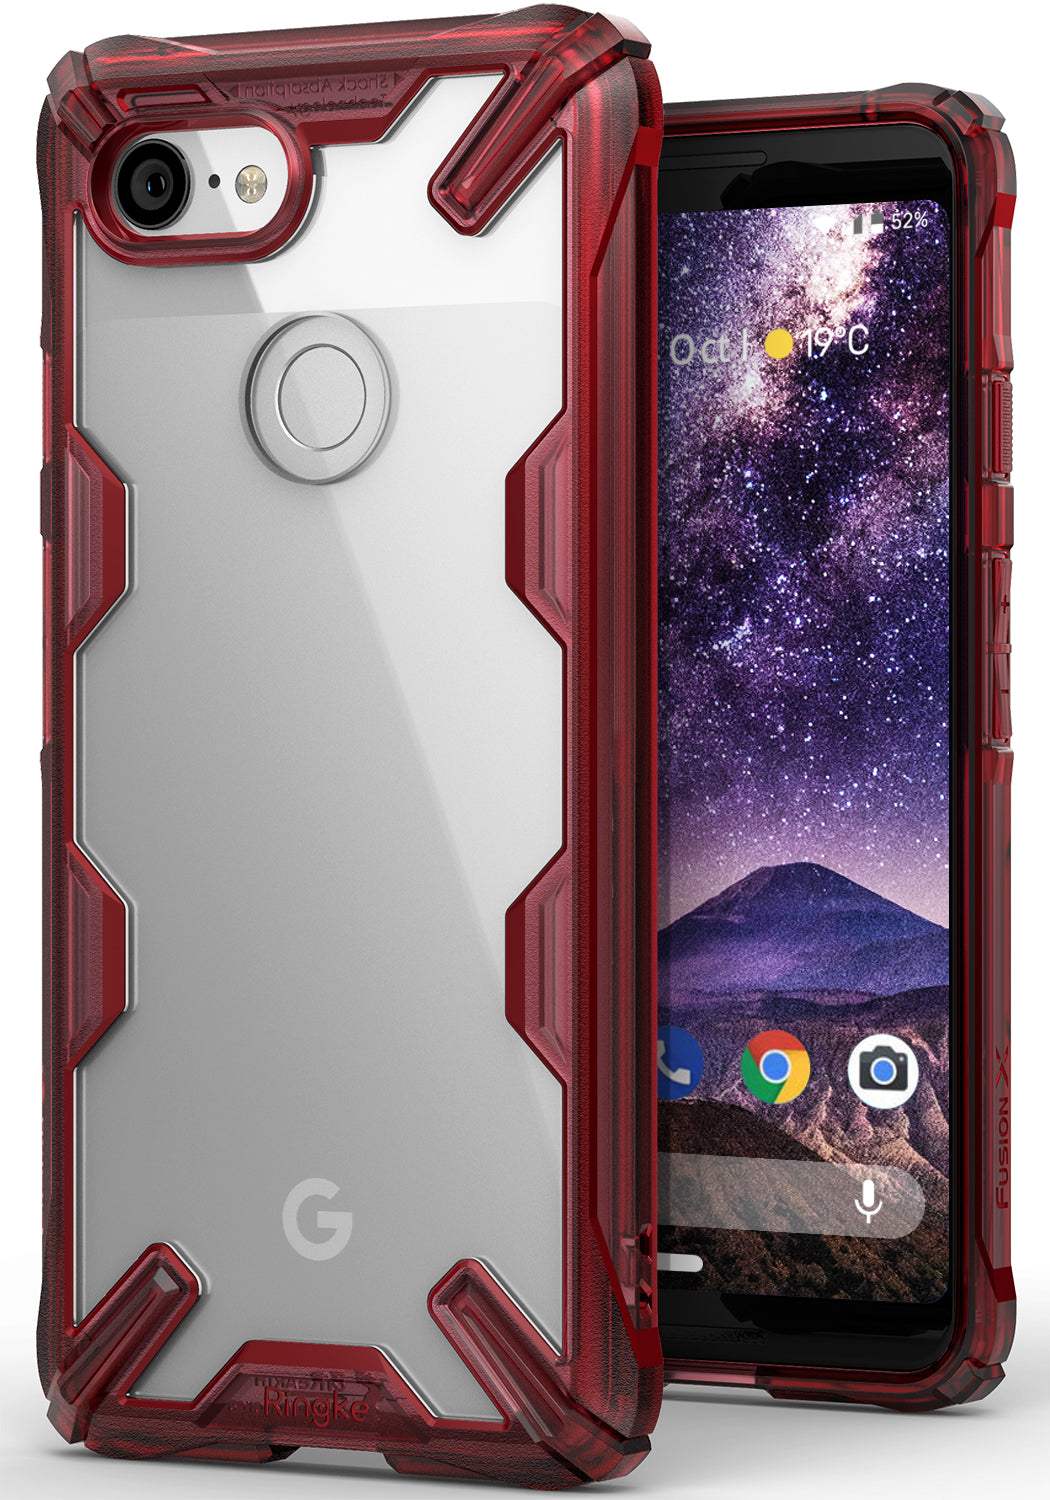 ringke fusion-x rugged heavy duty clear back case cover for google pixel 3 main ruby red